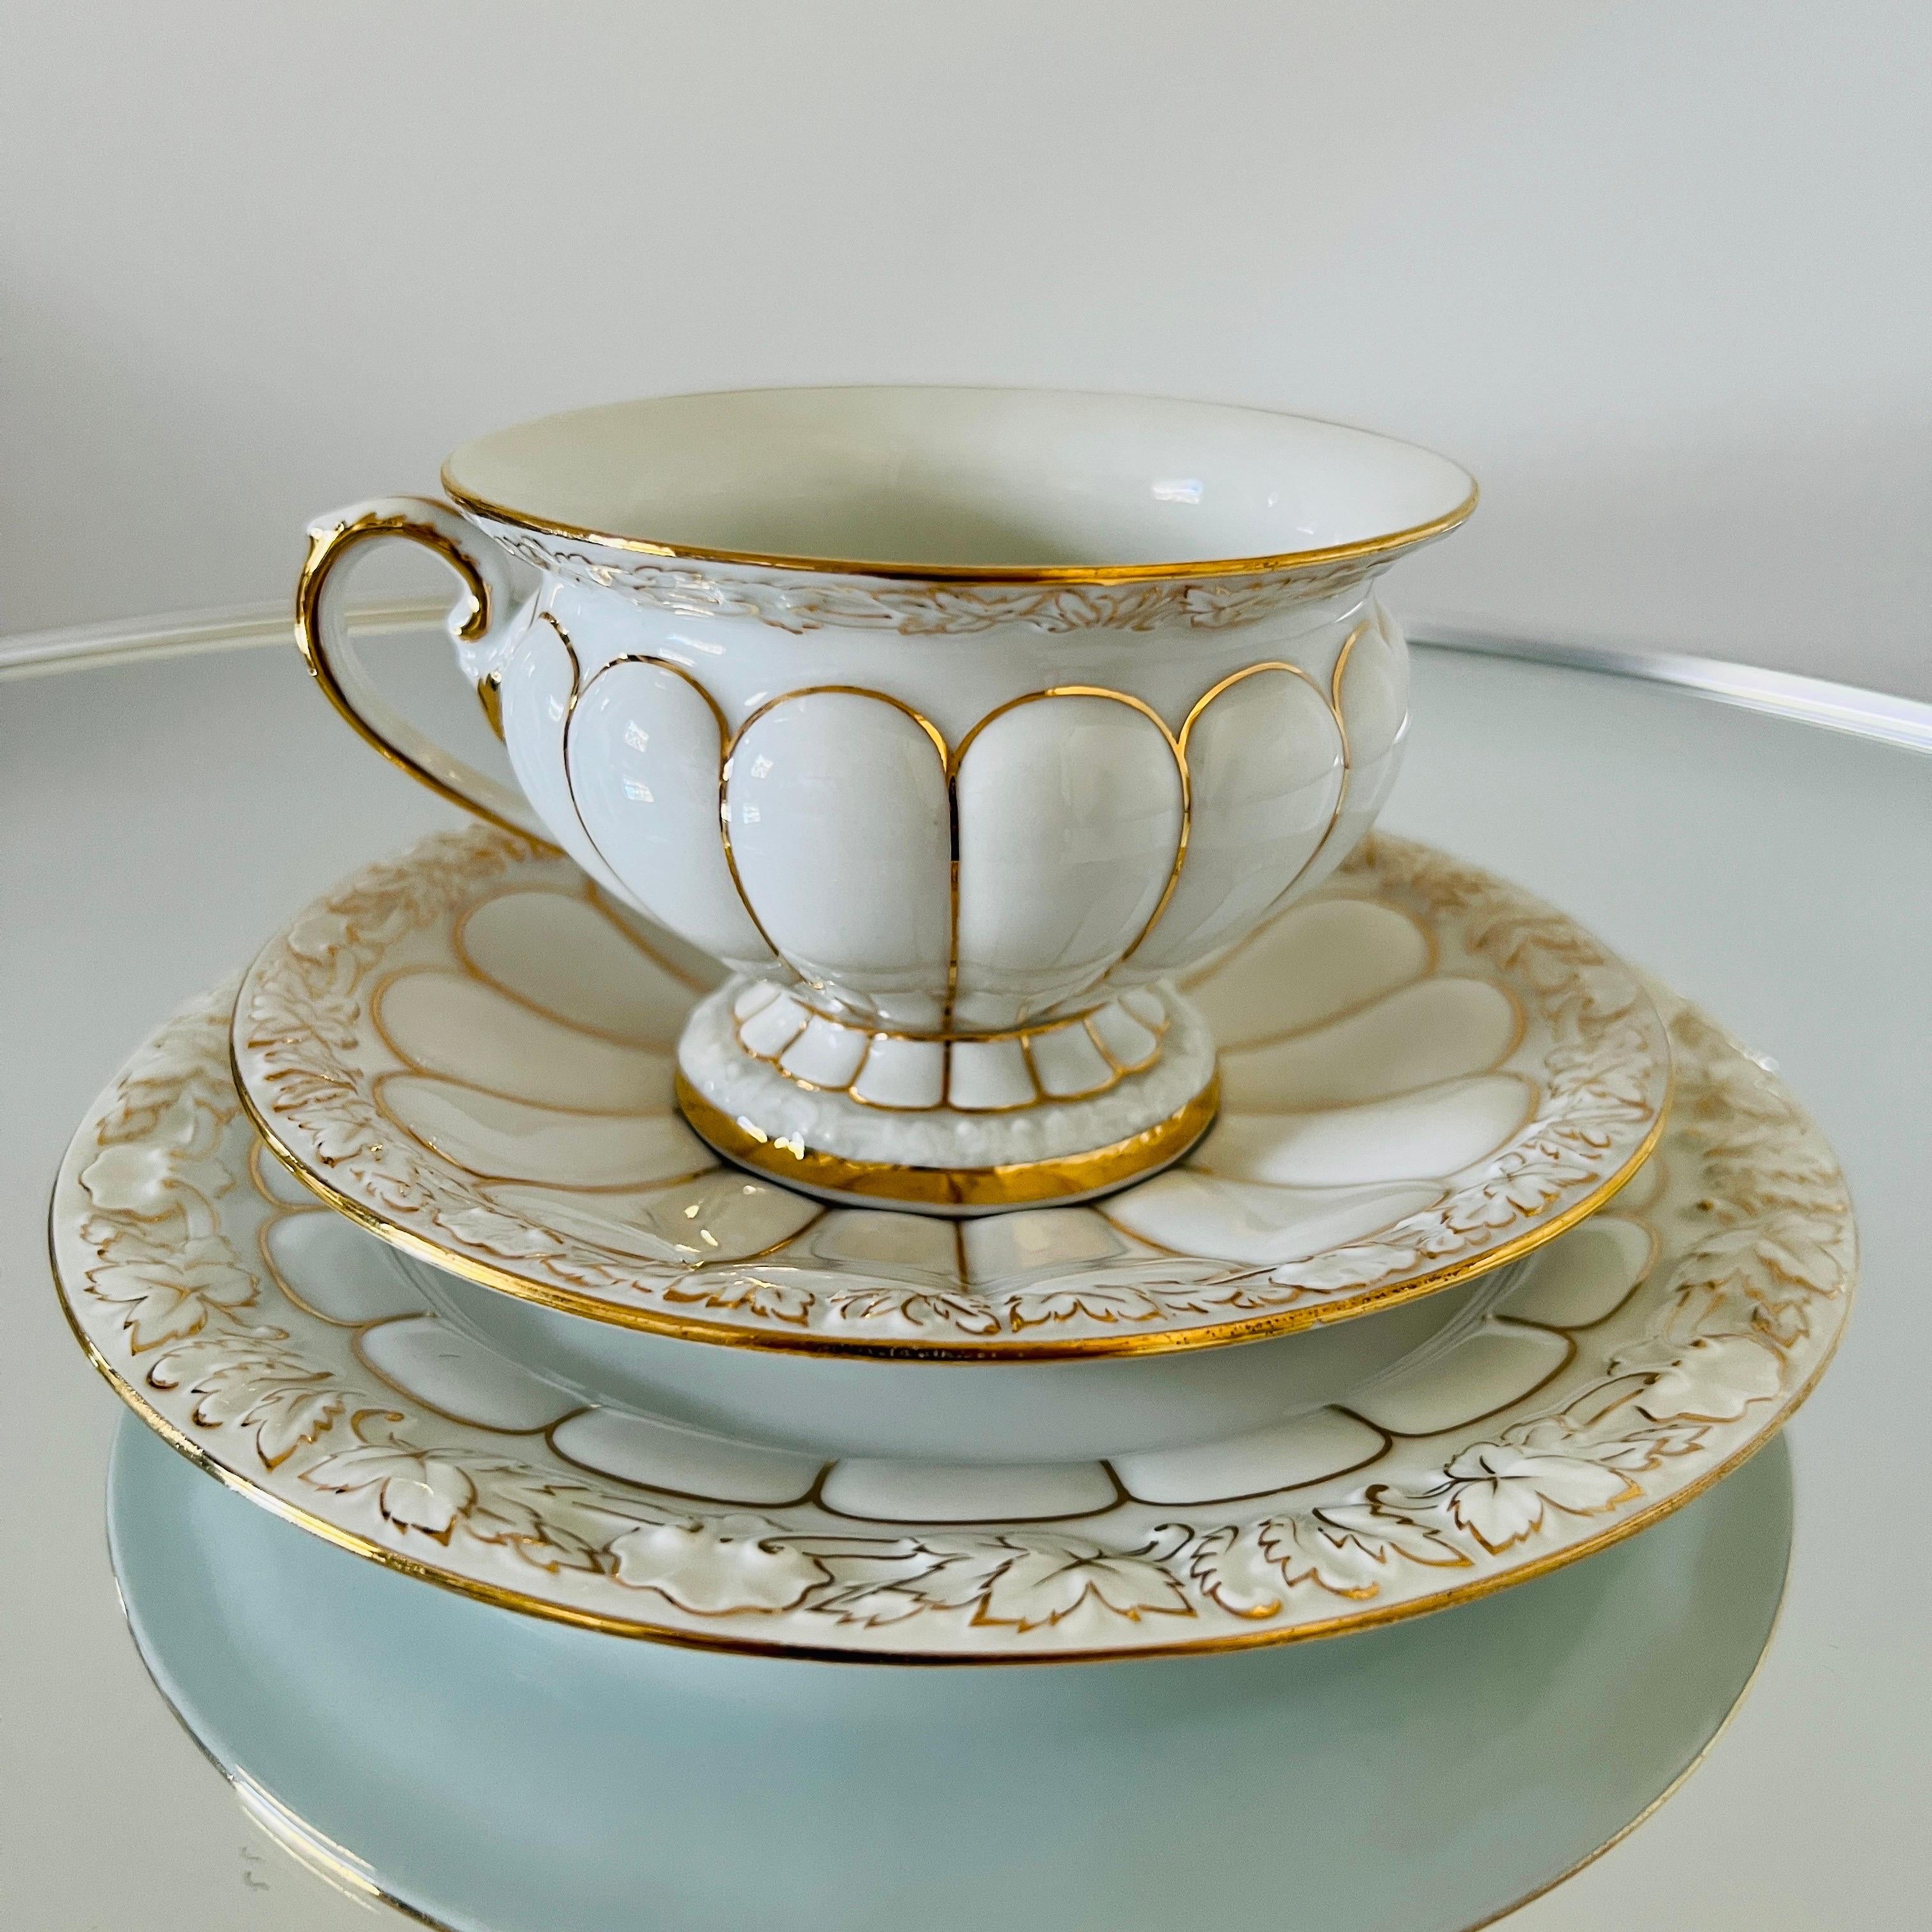 Meissen porcelain set from the opulent Golden Baroque series handmade in Germany.  The set includes 40 pieces - 13 coffee cups / 16 saucers / 11 dessert plates.  The cups, saucers, and dessert plates have a white glaze finish with ornamental relief